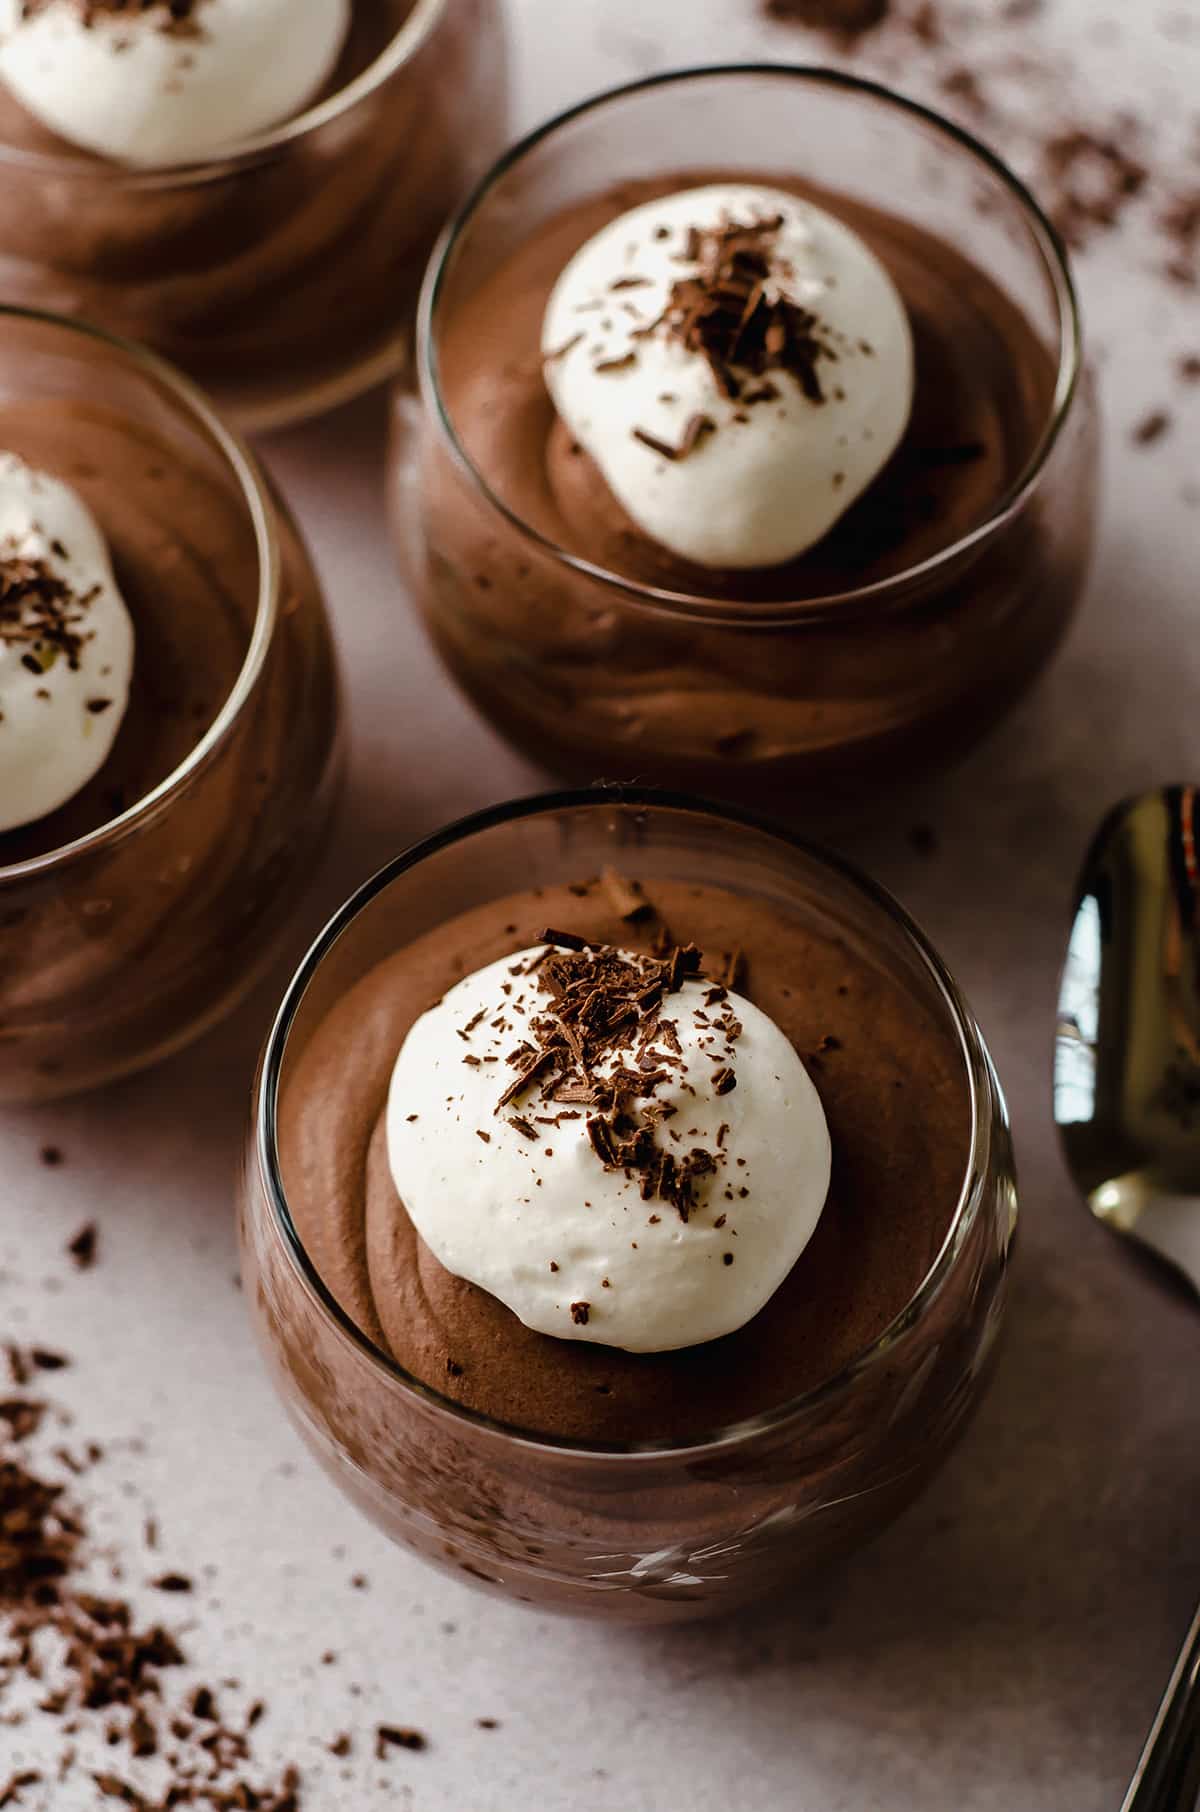 dessert cups filled with easy chocolate mousse topped with whipped cream and shaved chocolate